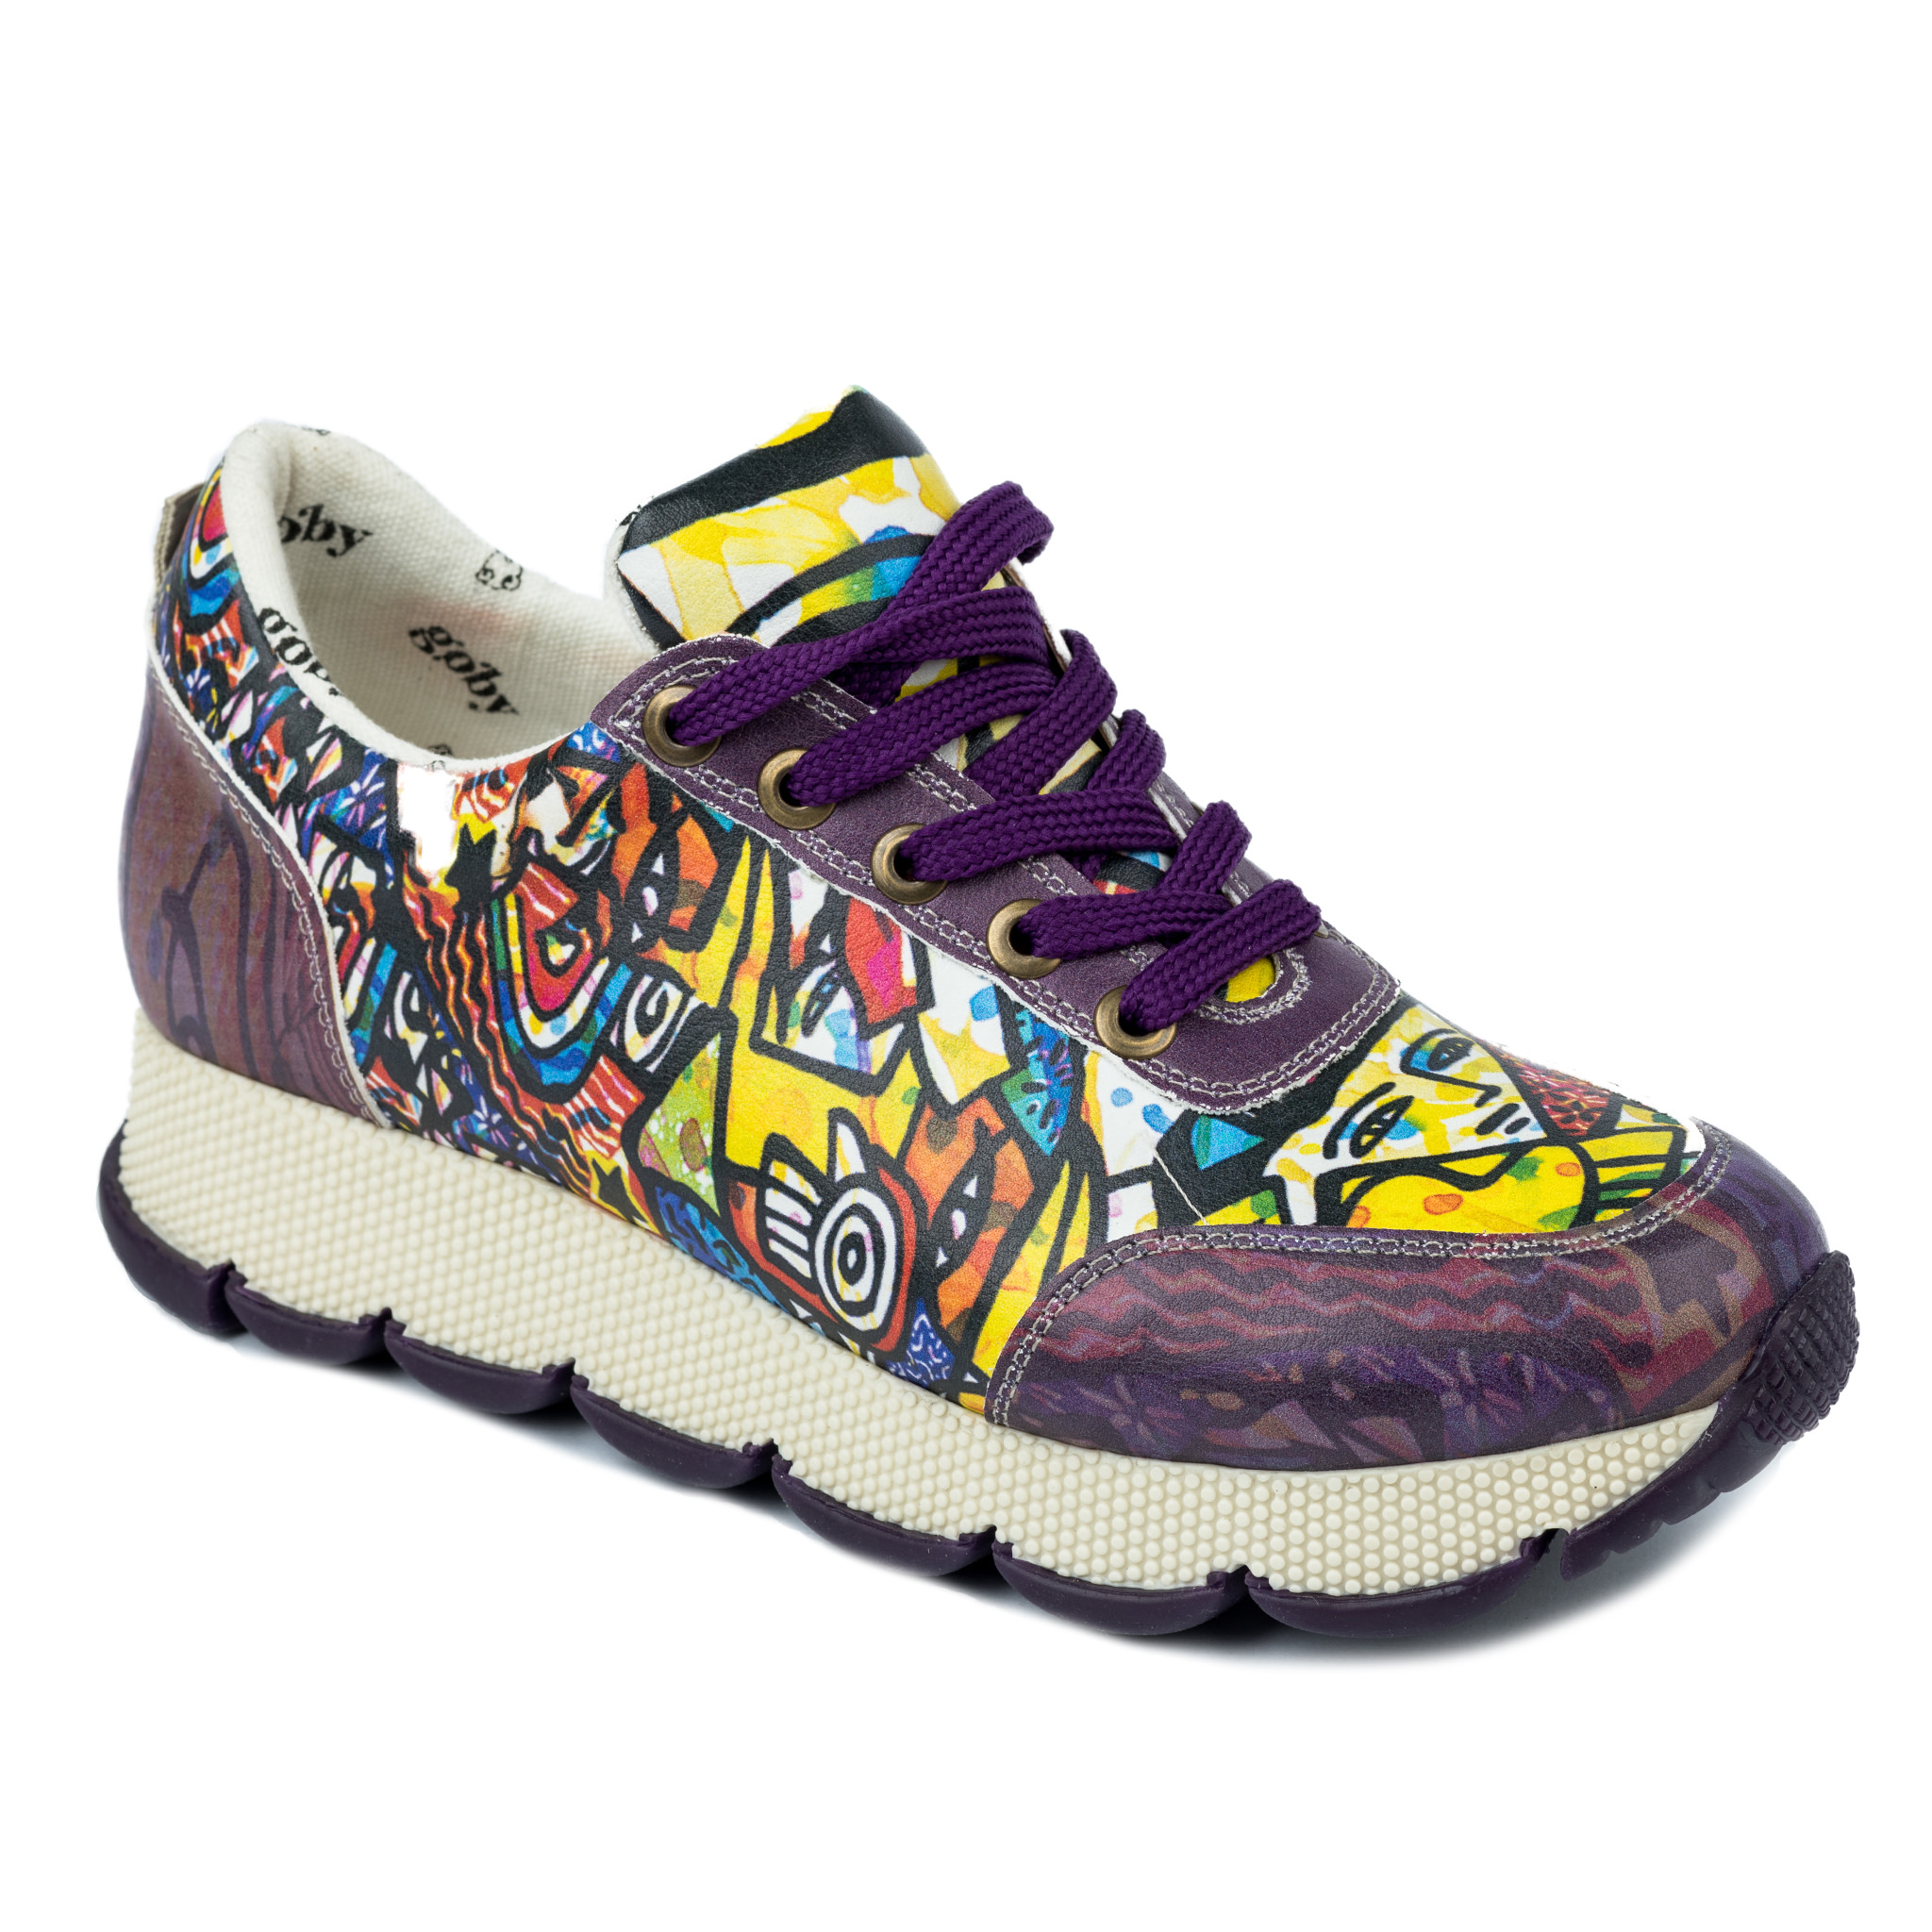 LACE UP PRINTED SNEAKERS - PURPLE